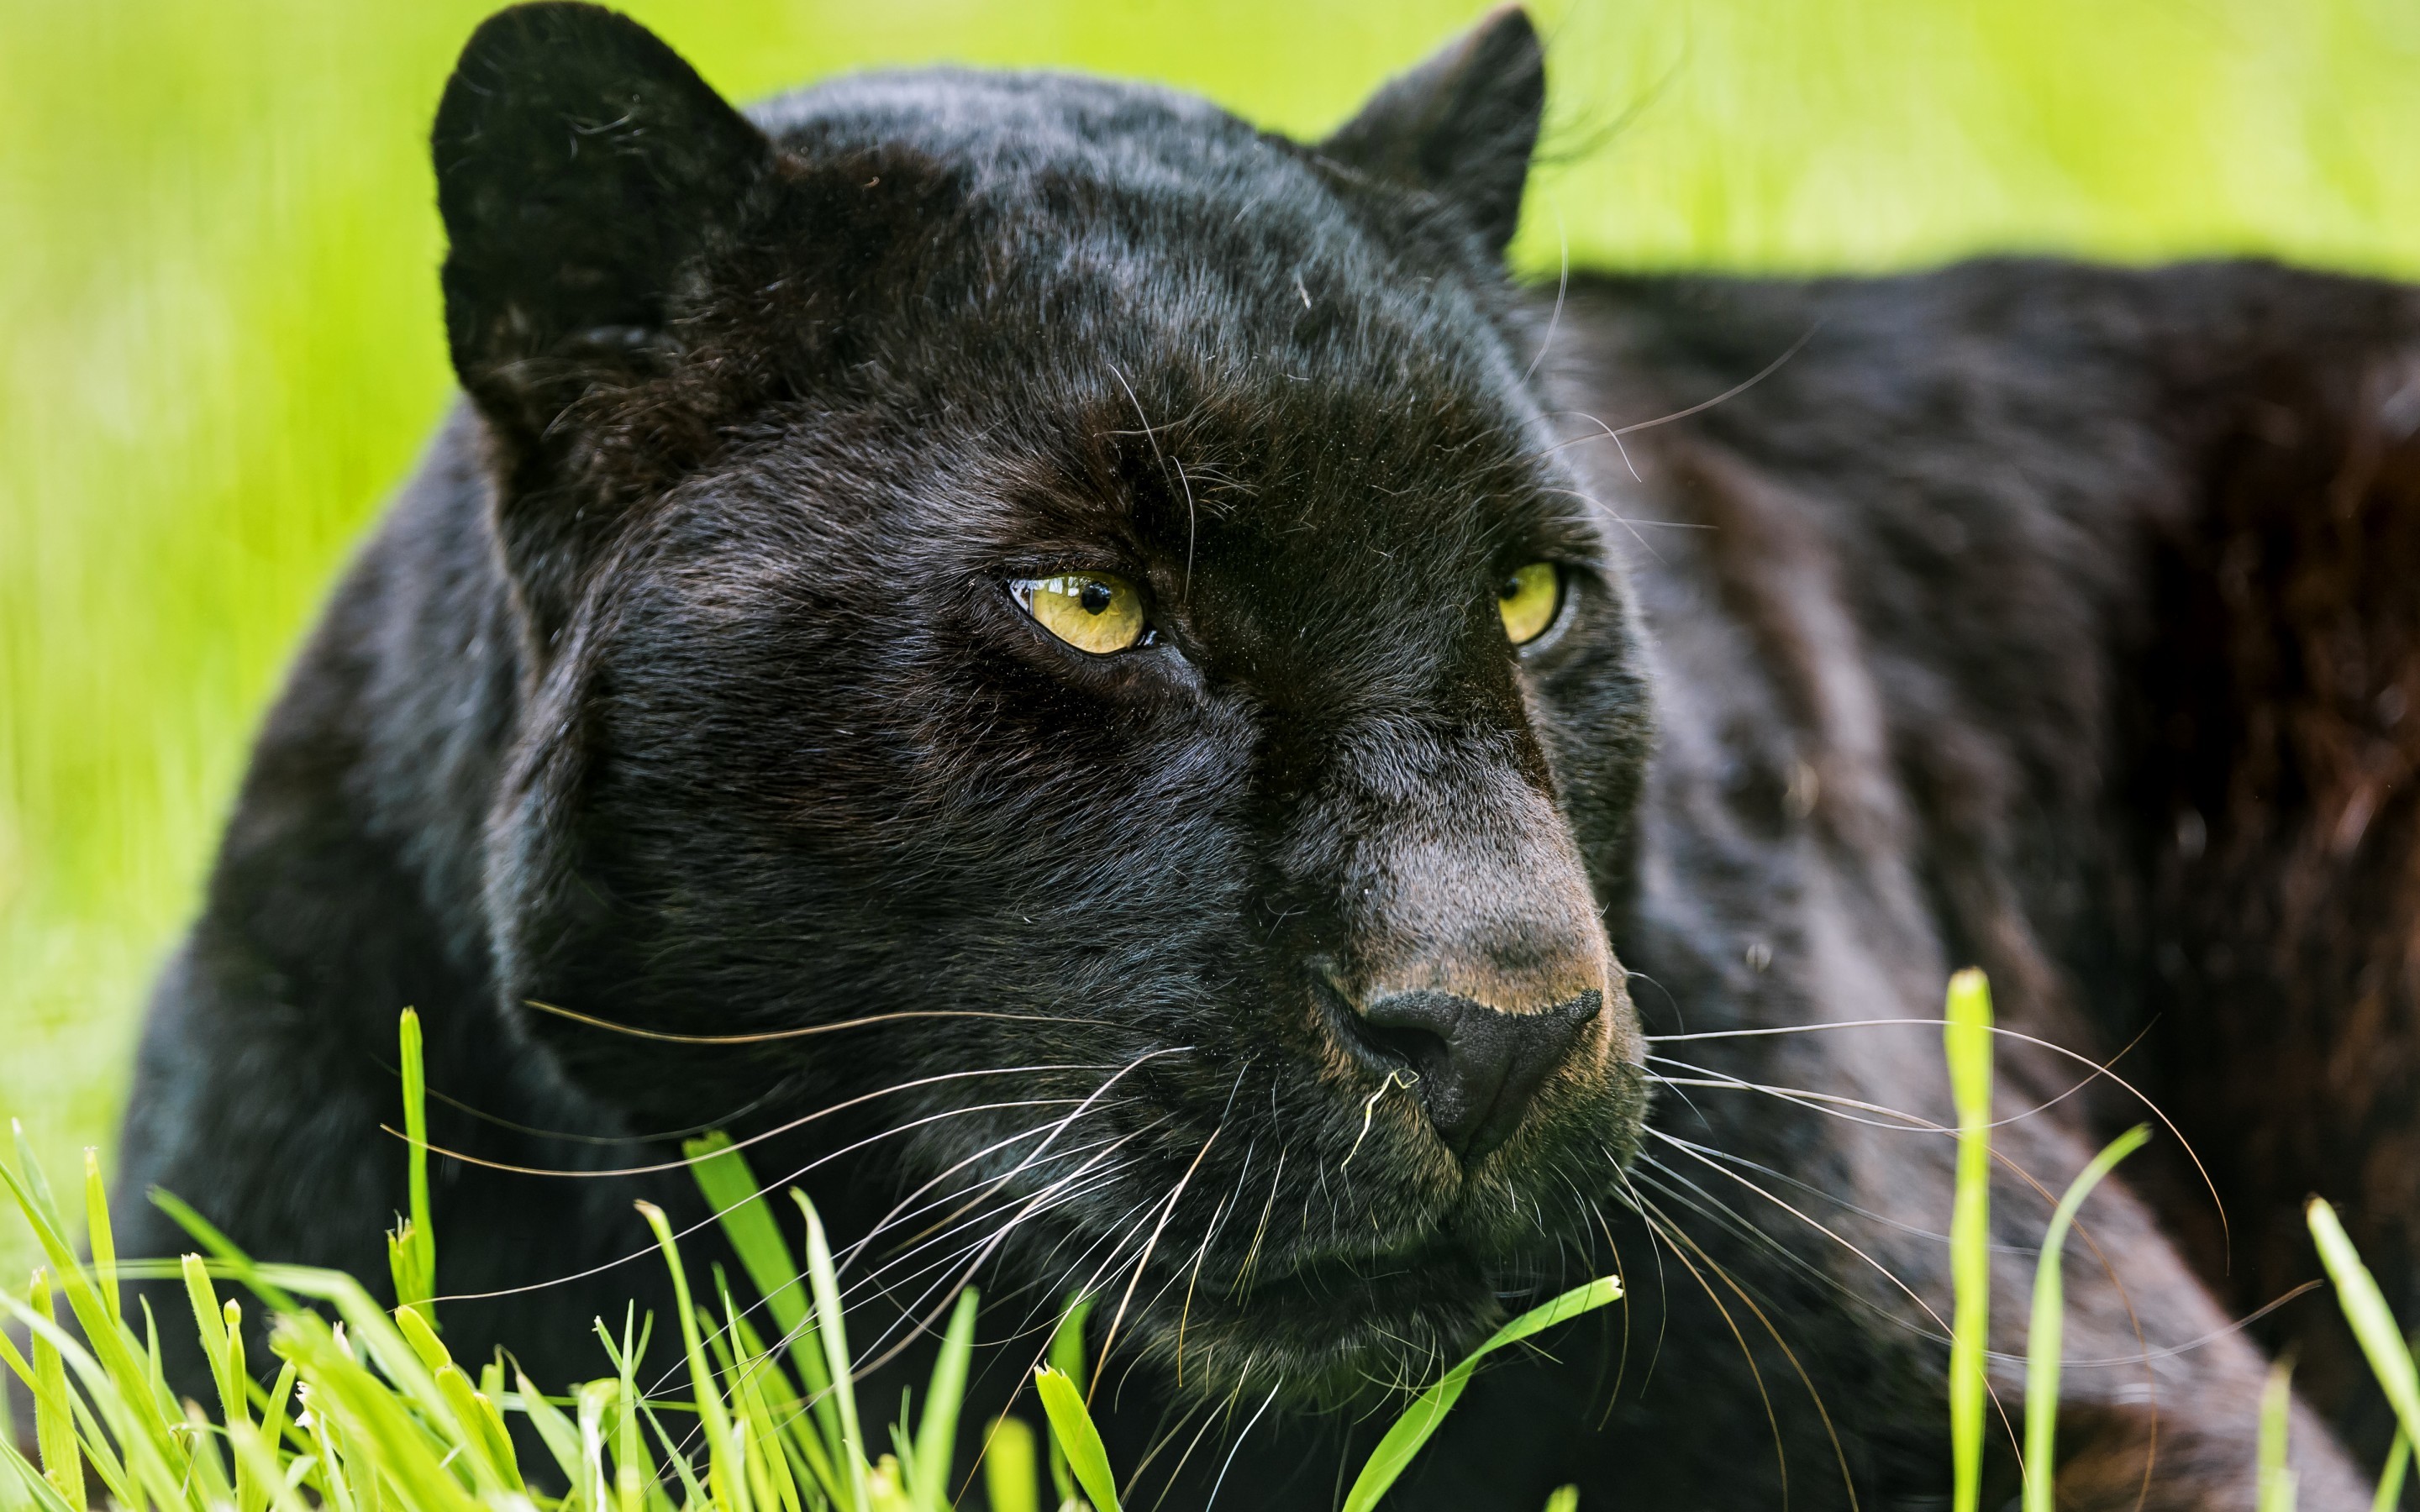 2880x1800 Black panthers in Asia and Africa are leopards and black panthers in the  Americas are black jaguars. A black panther is the melanistic color variant  of any ...